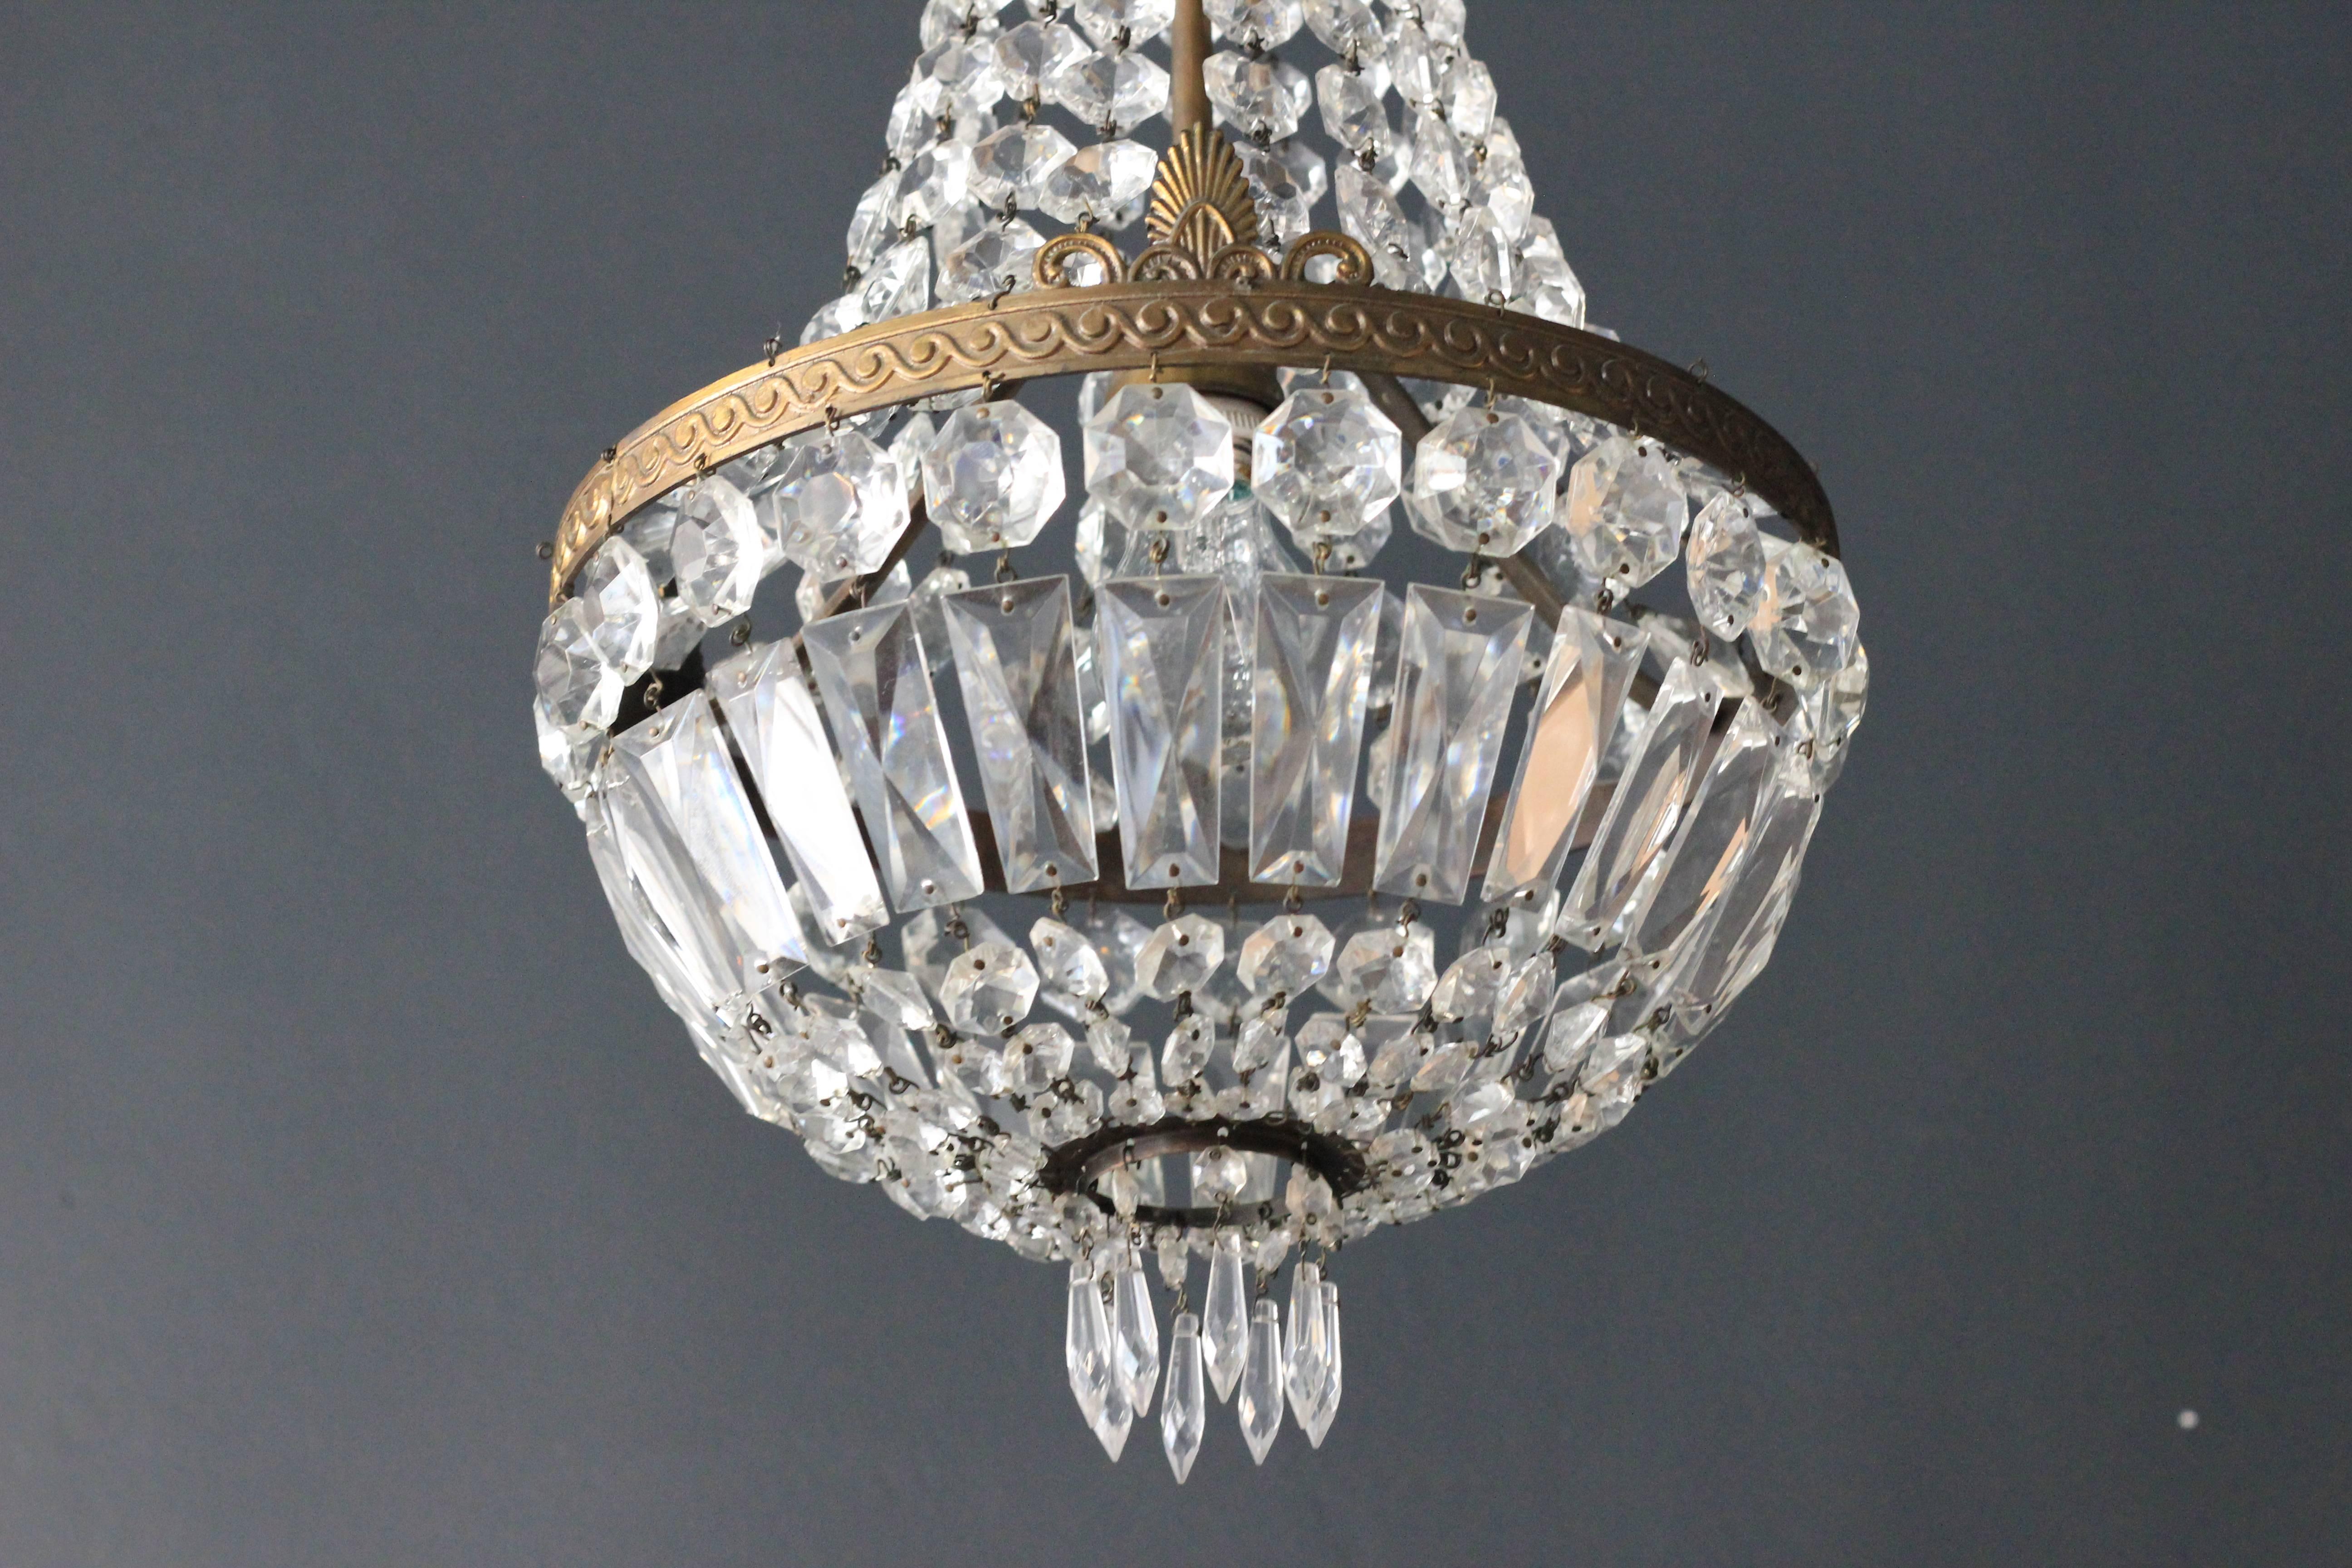 Original preserved chandelier, circa 1950. Cabling and sockets completely renewed. Crystal hand-knotted
Measures: Total height: 70 cm, height without chain: 60 cm, diameter 33 cm, weight (approximately) 4kg.

Number of lights: One-light bulb